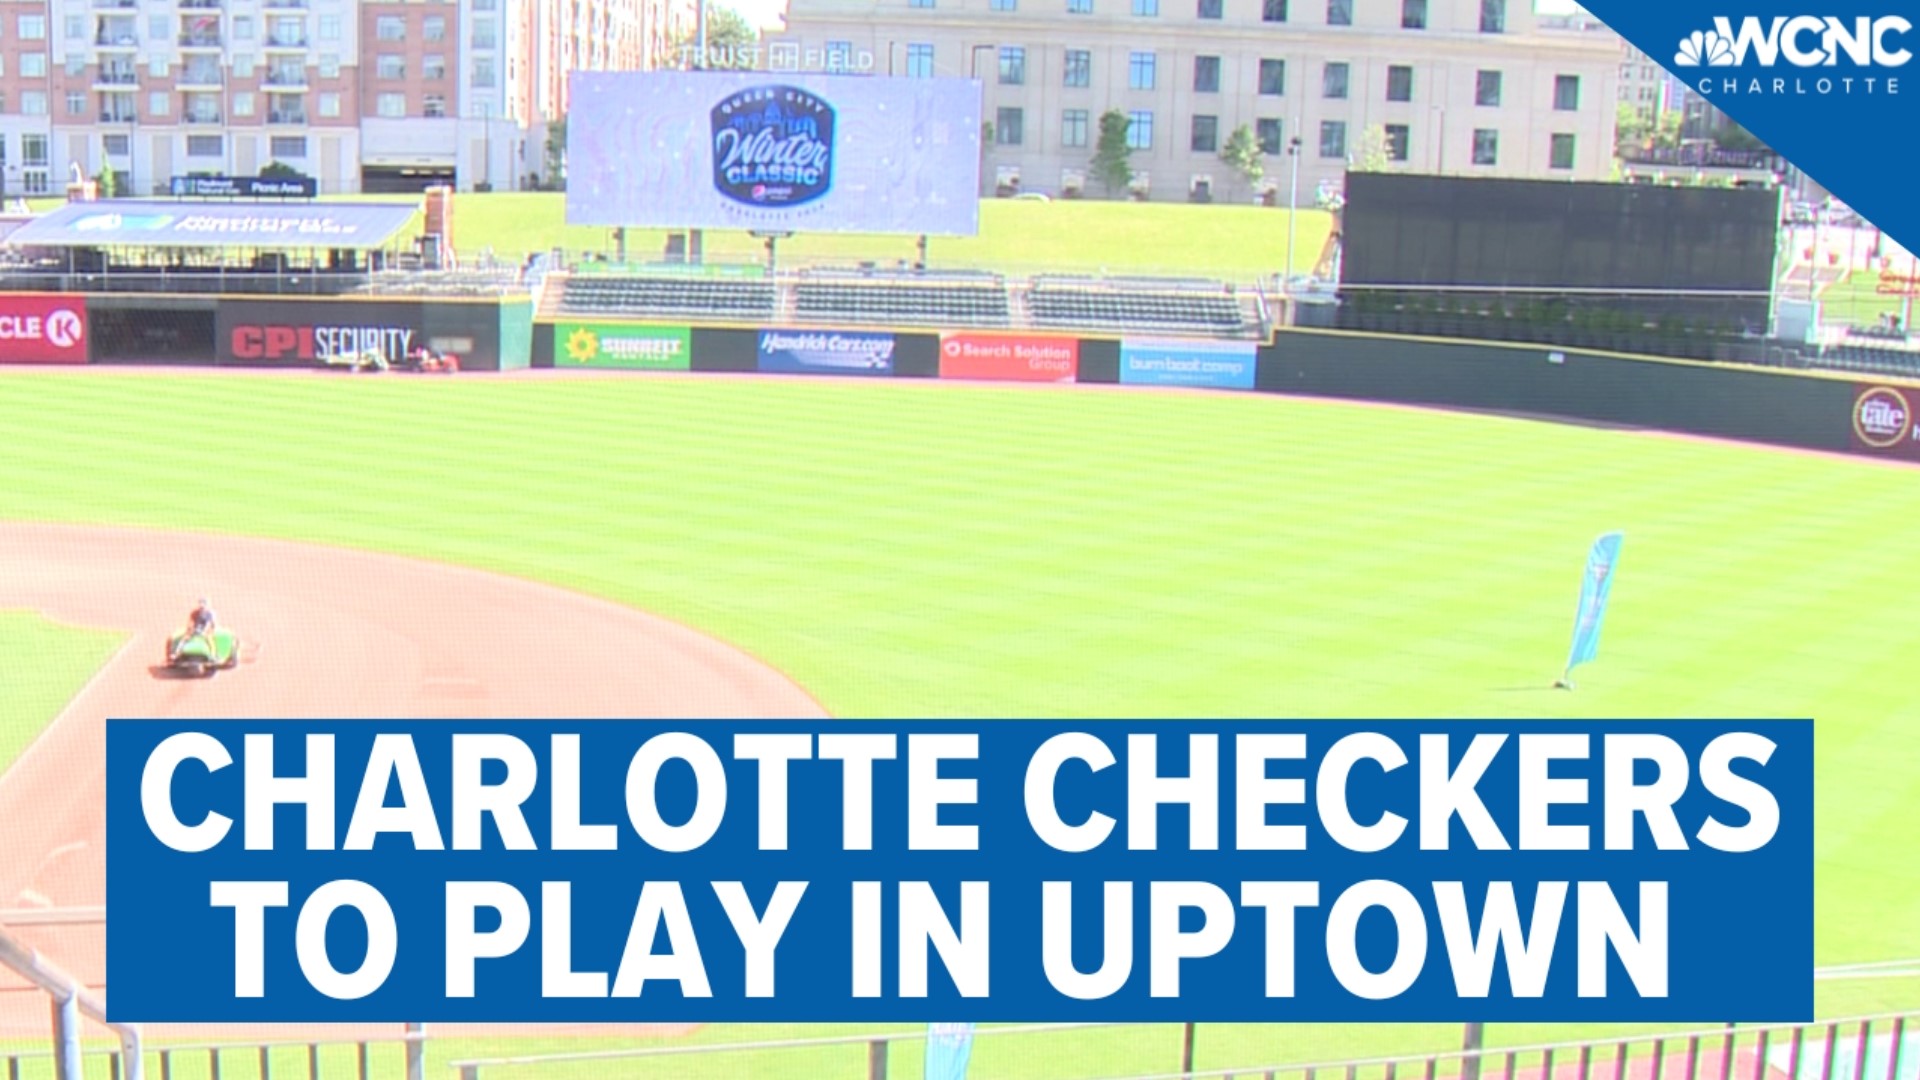 Charlotte Checkers to play in Uptown wcnc